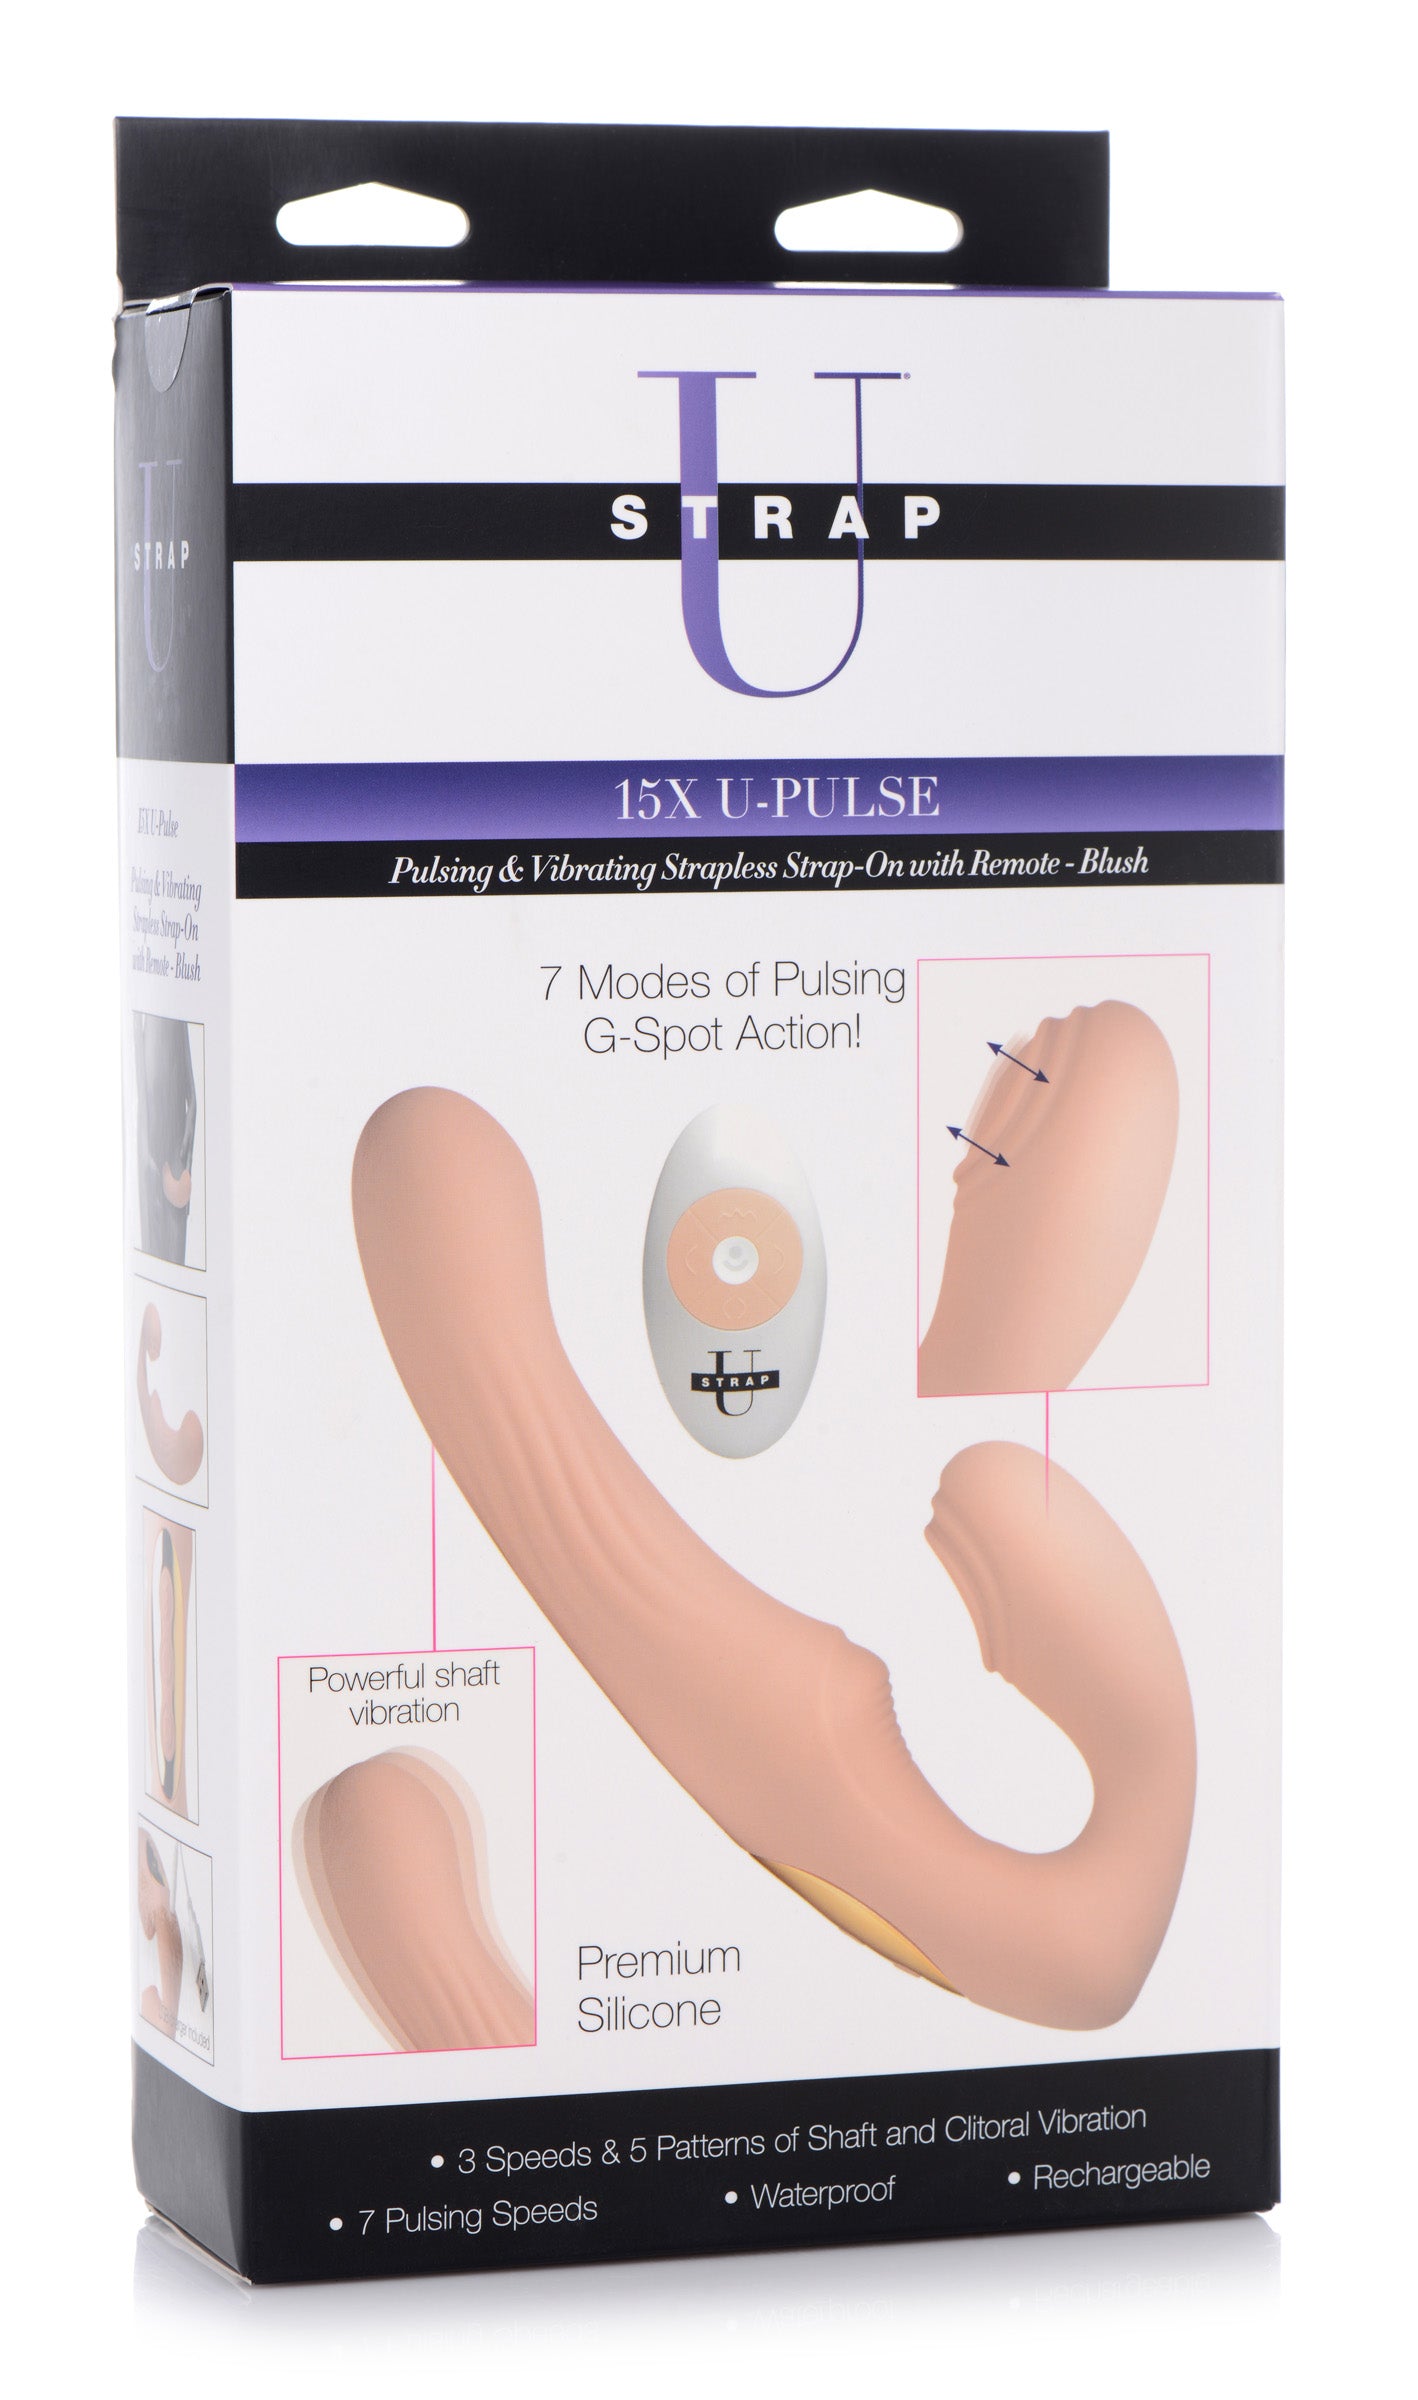 15X U-Pulse Silicone Pulsating and Vibrating Strapless Strap-on with Remote - Blush - UABDSM